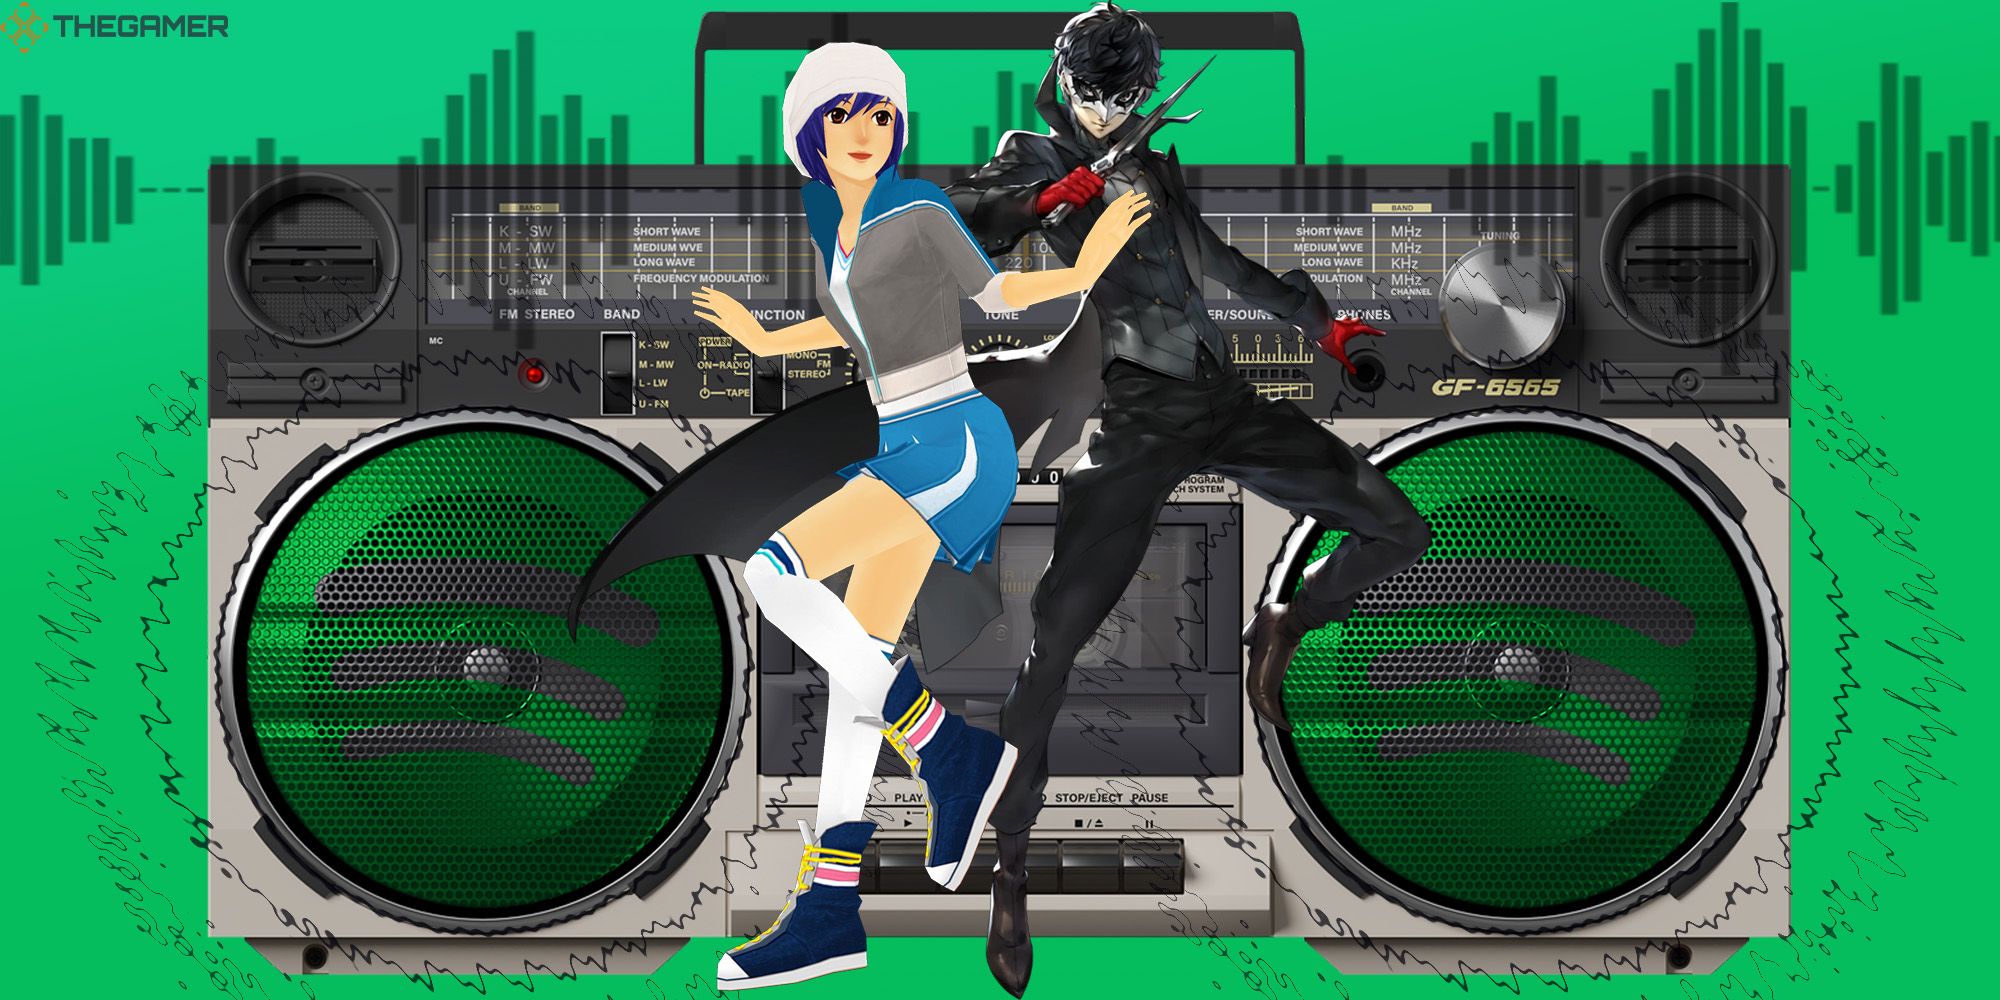 Emi from Dance Dance Revolution and Joker from Persona 5 dance in front of a boombox with custom Spotify themed speakers.